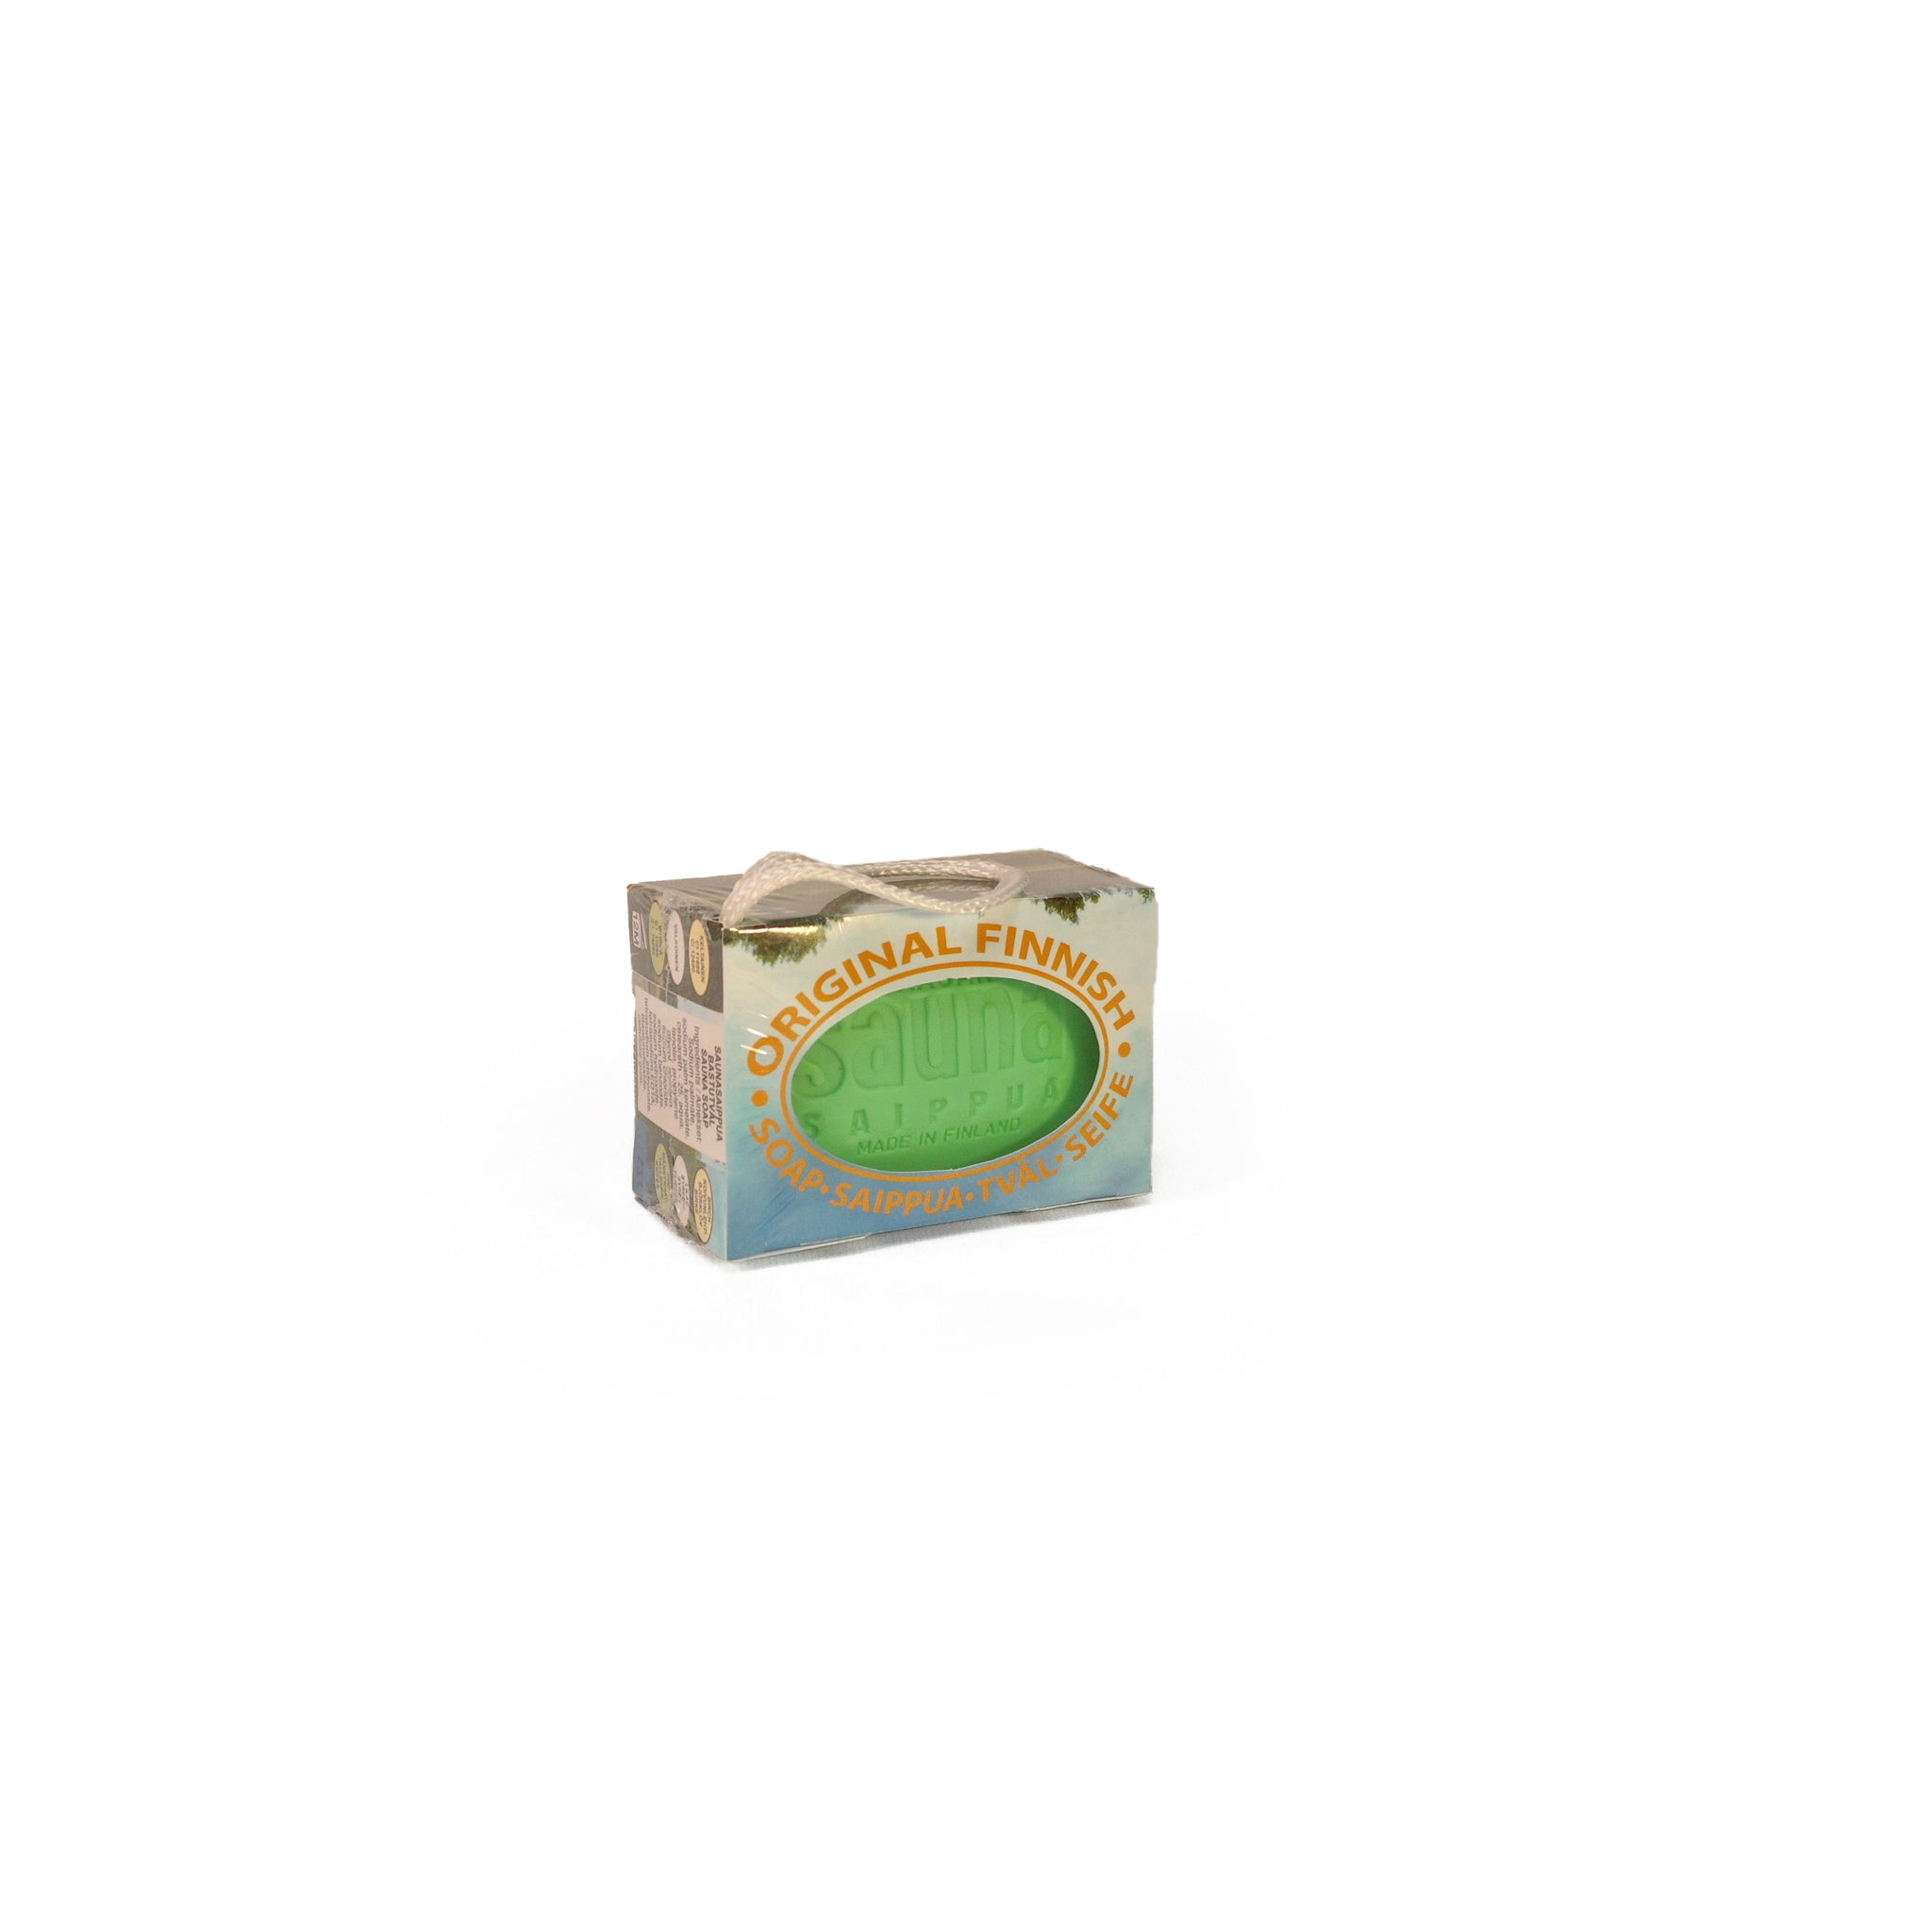 Box containing green pine scented soap bar on white background.